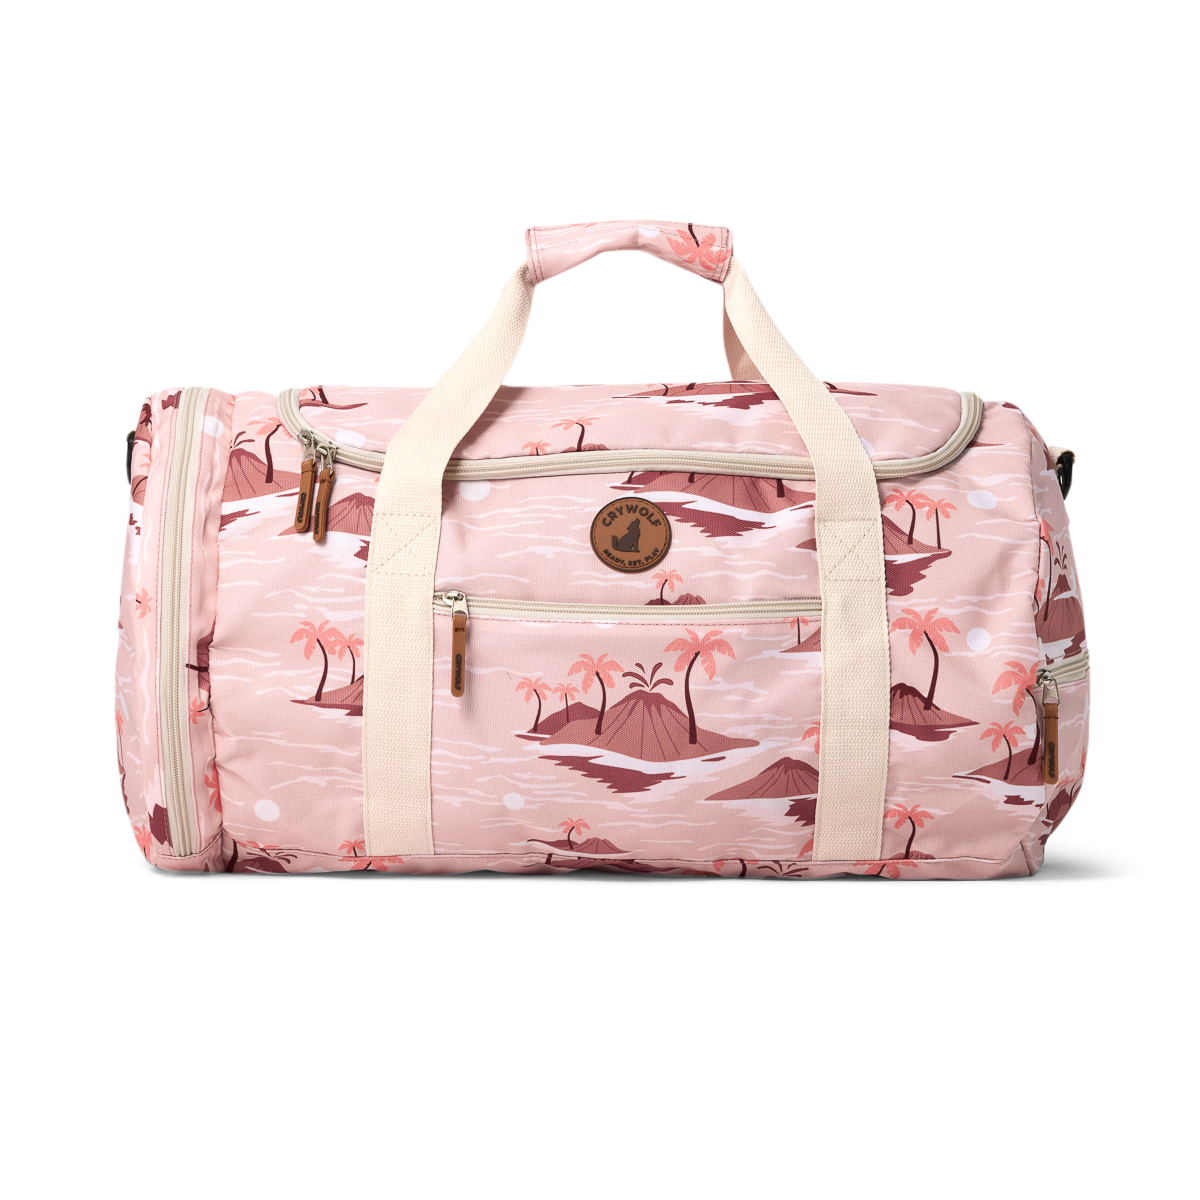 Crywolf Packable Duffel Bag Sunset Lost Island